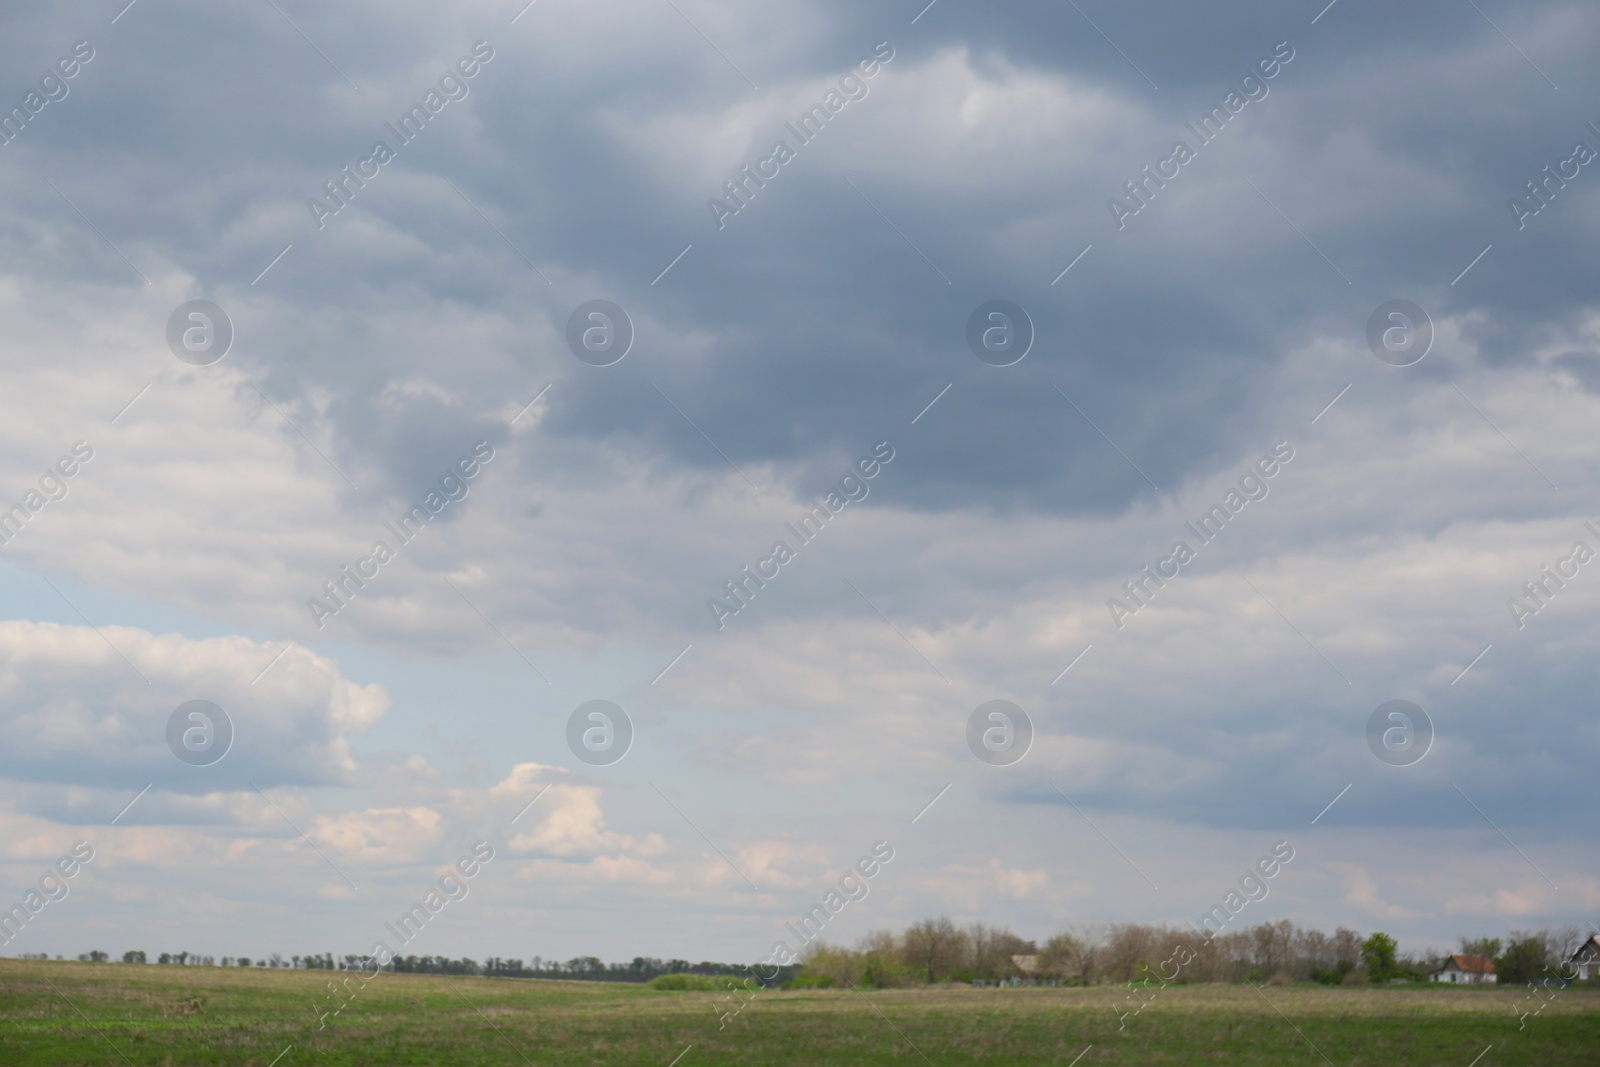 Photo of Houses under cloudy sky. Picturesque rural landscape